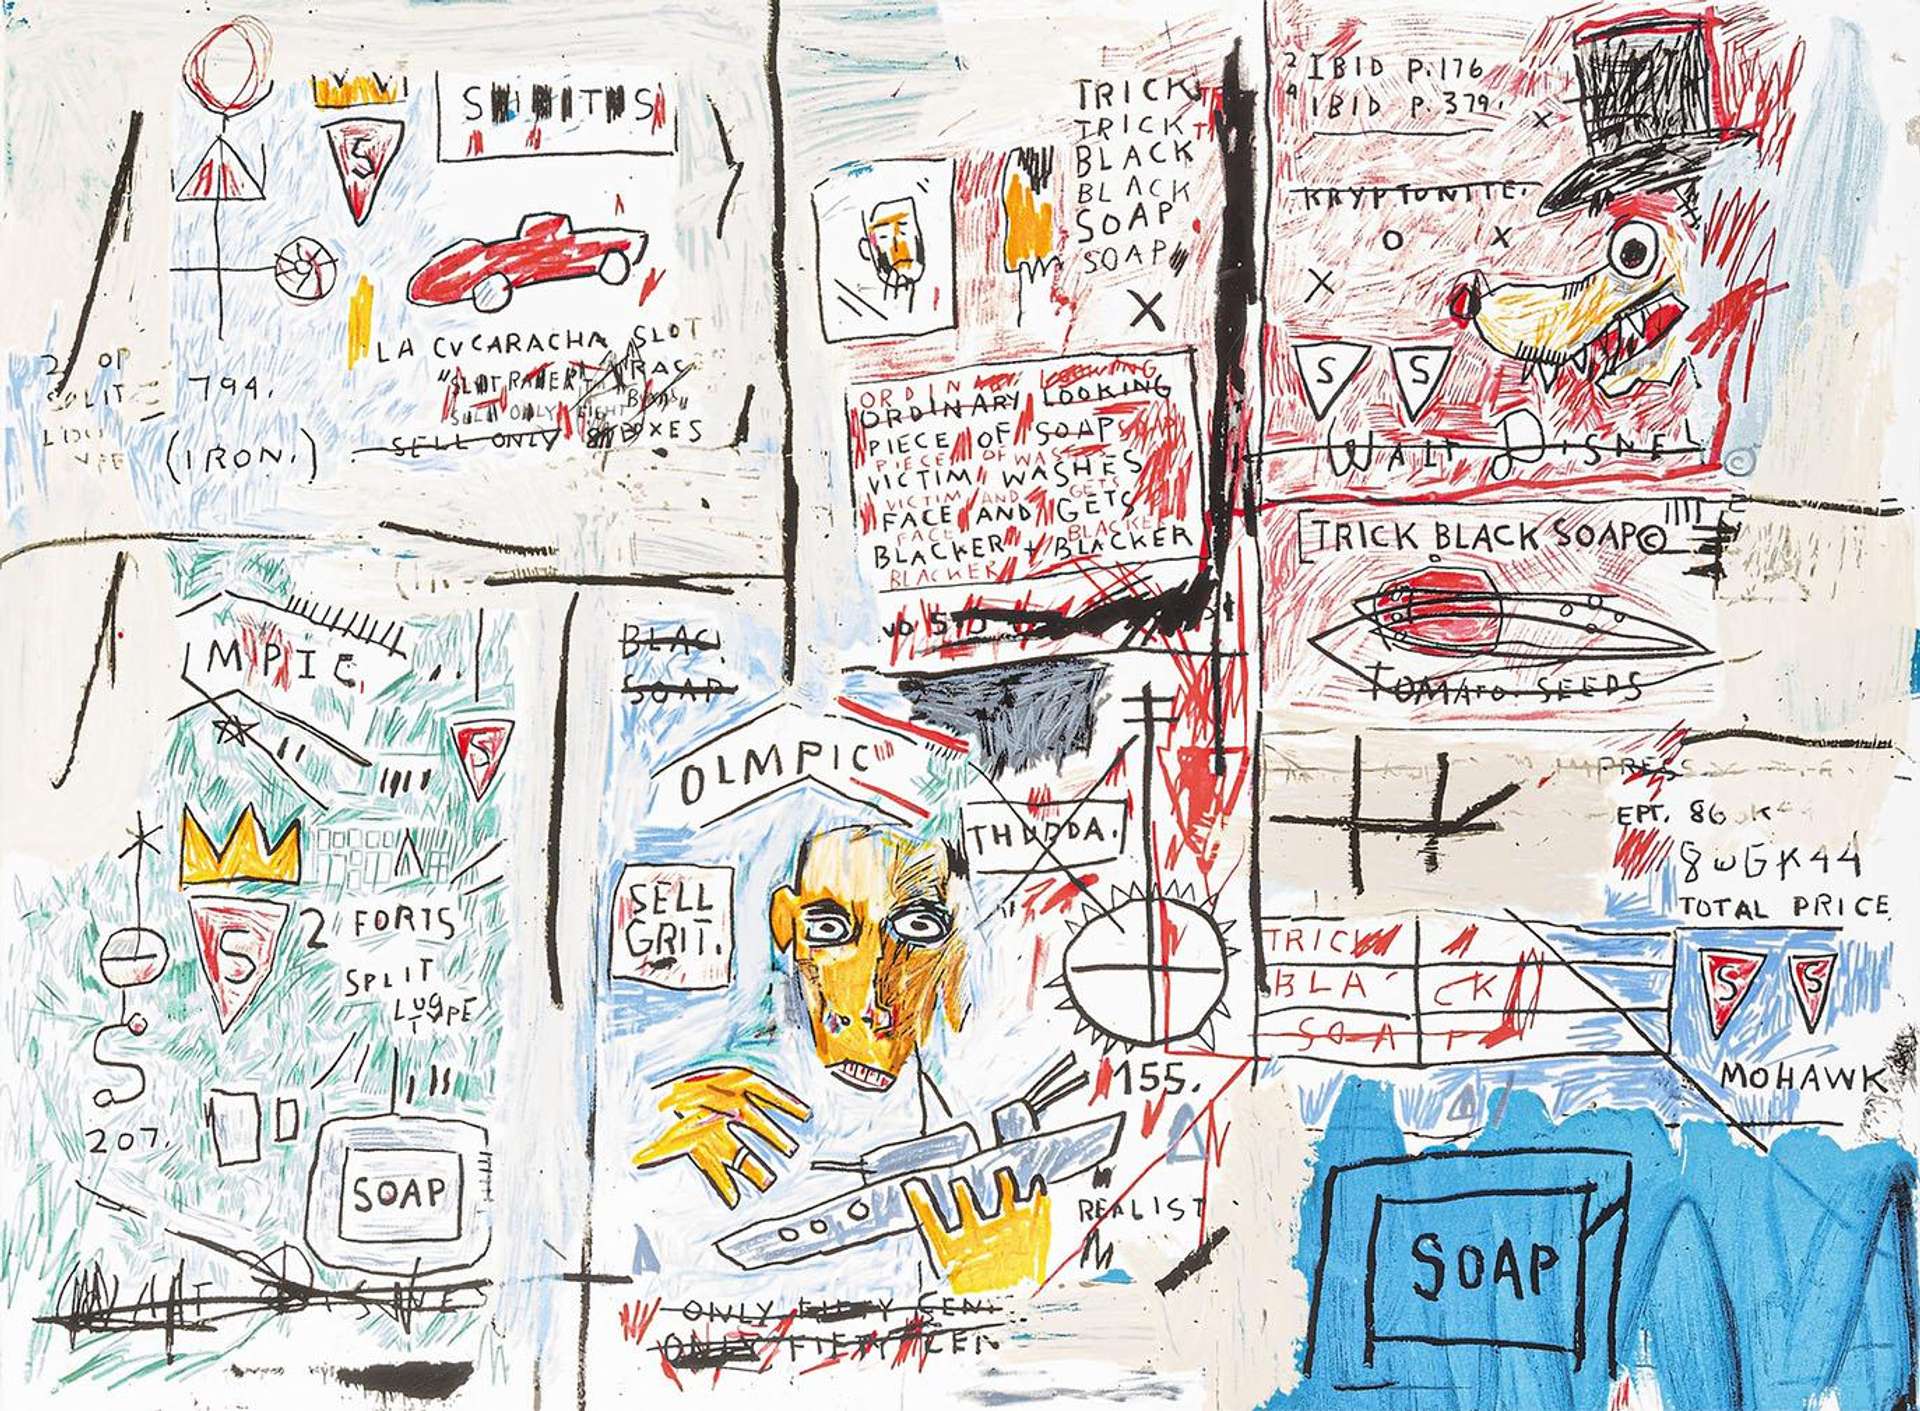 From Graffiti to Gallery: The Evolution of Basquiat's Artistic Style